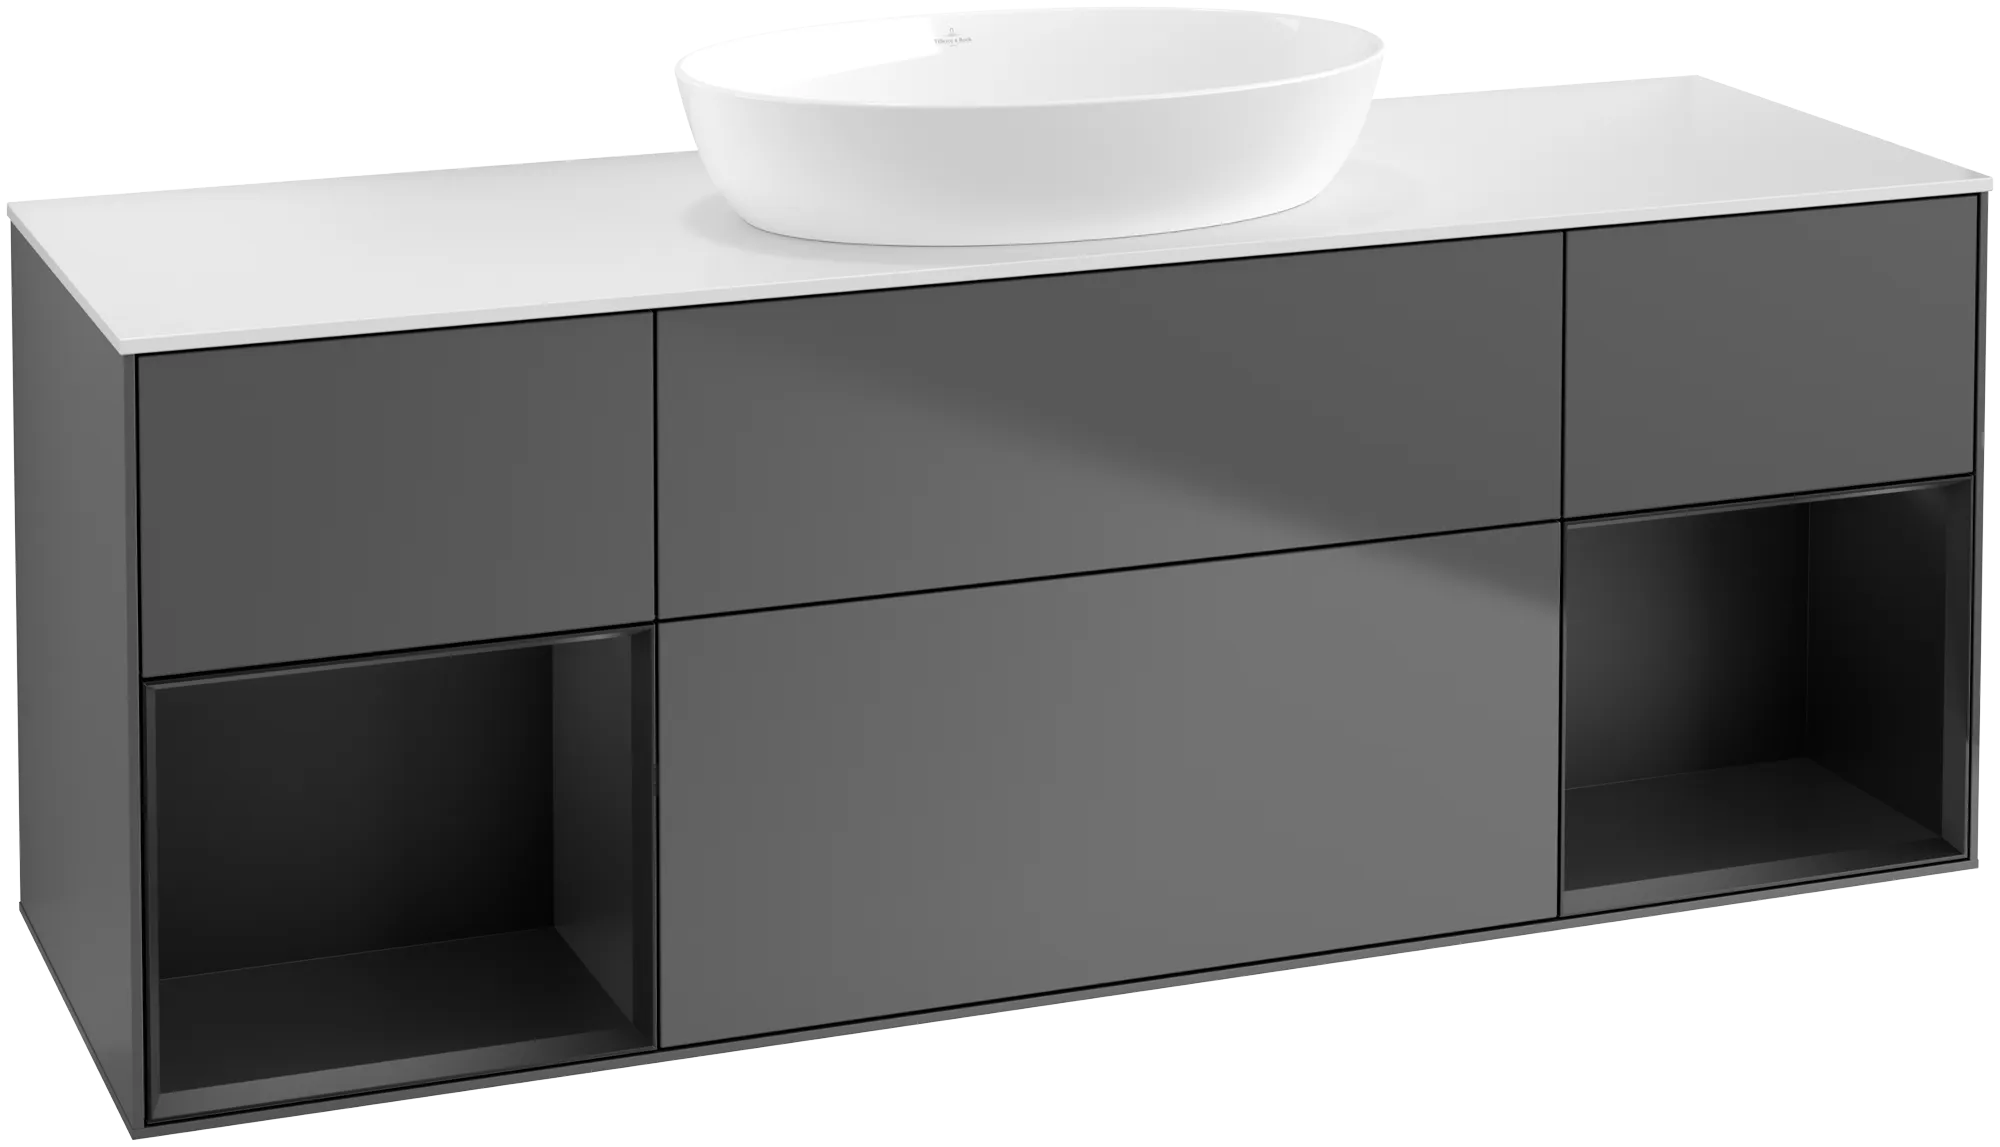 Picture of VILLEROY BOCH Finion Vanity unit, with lighting, 4 pull-out compartments, 1600 x 603 x 501 mm, Anthracite Matt Lacquer / Black Matt Lacquer / Glass White Matt #GD01PDGK